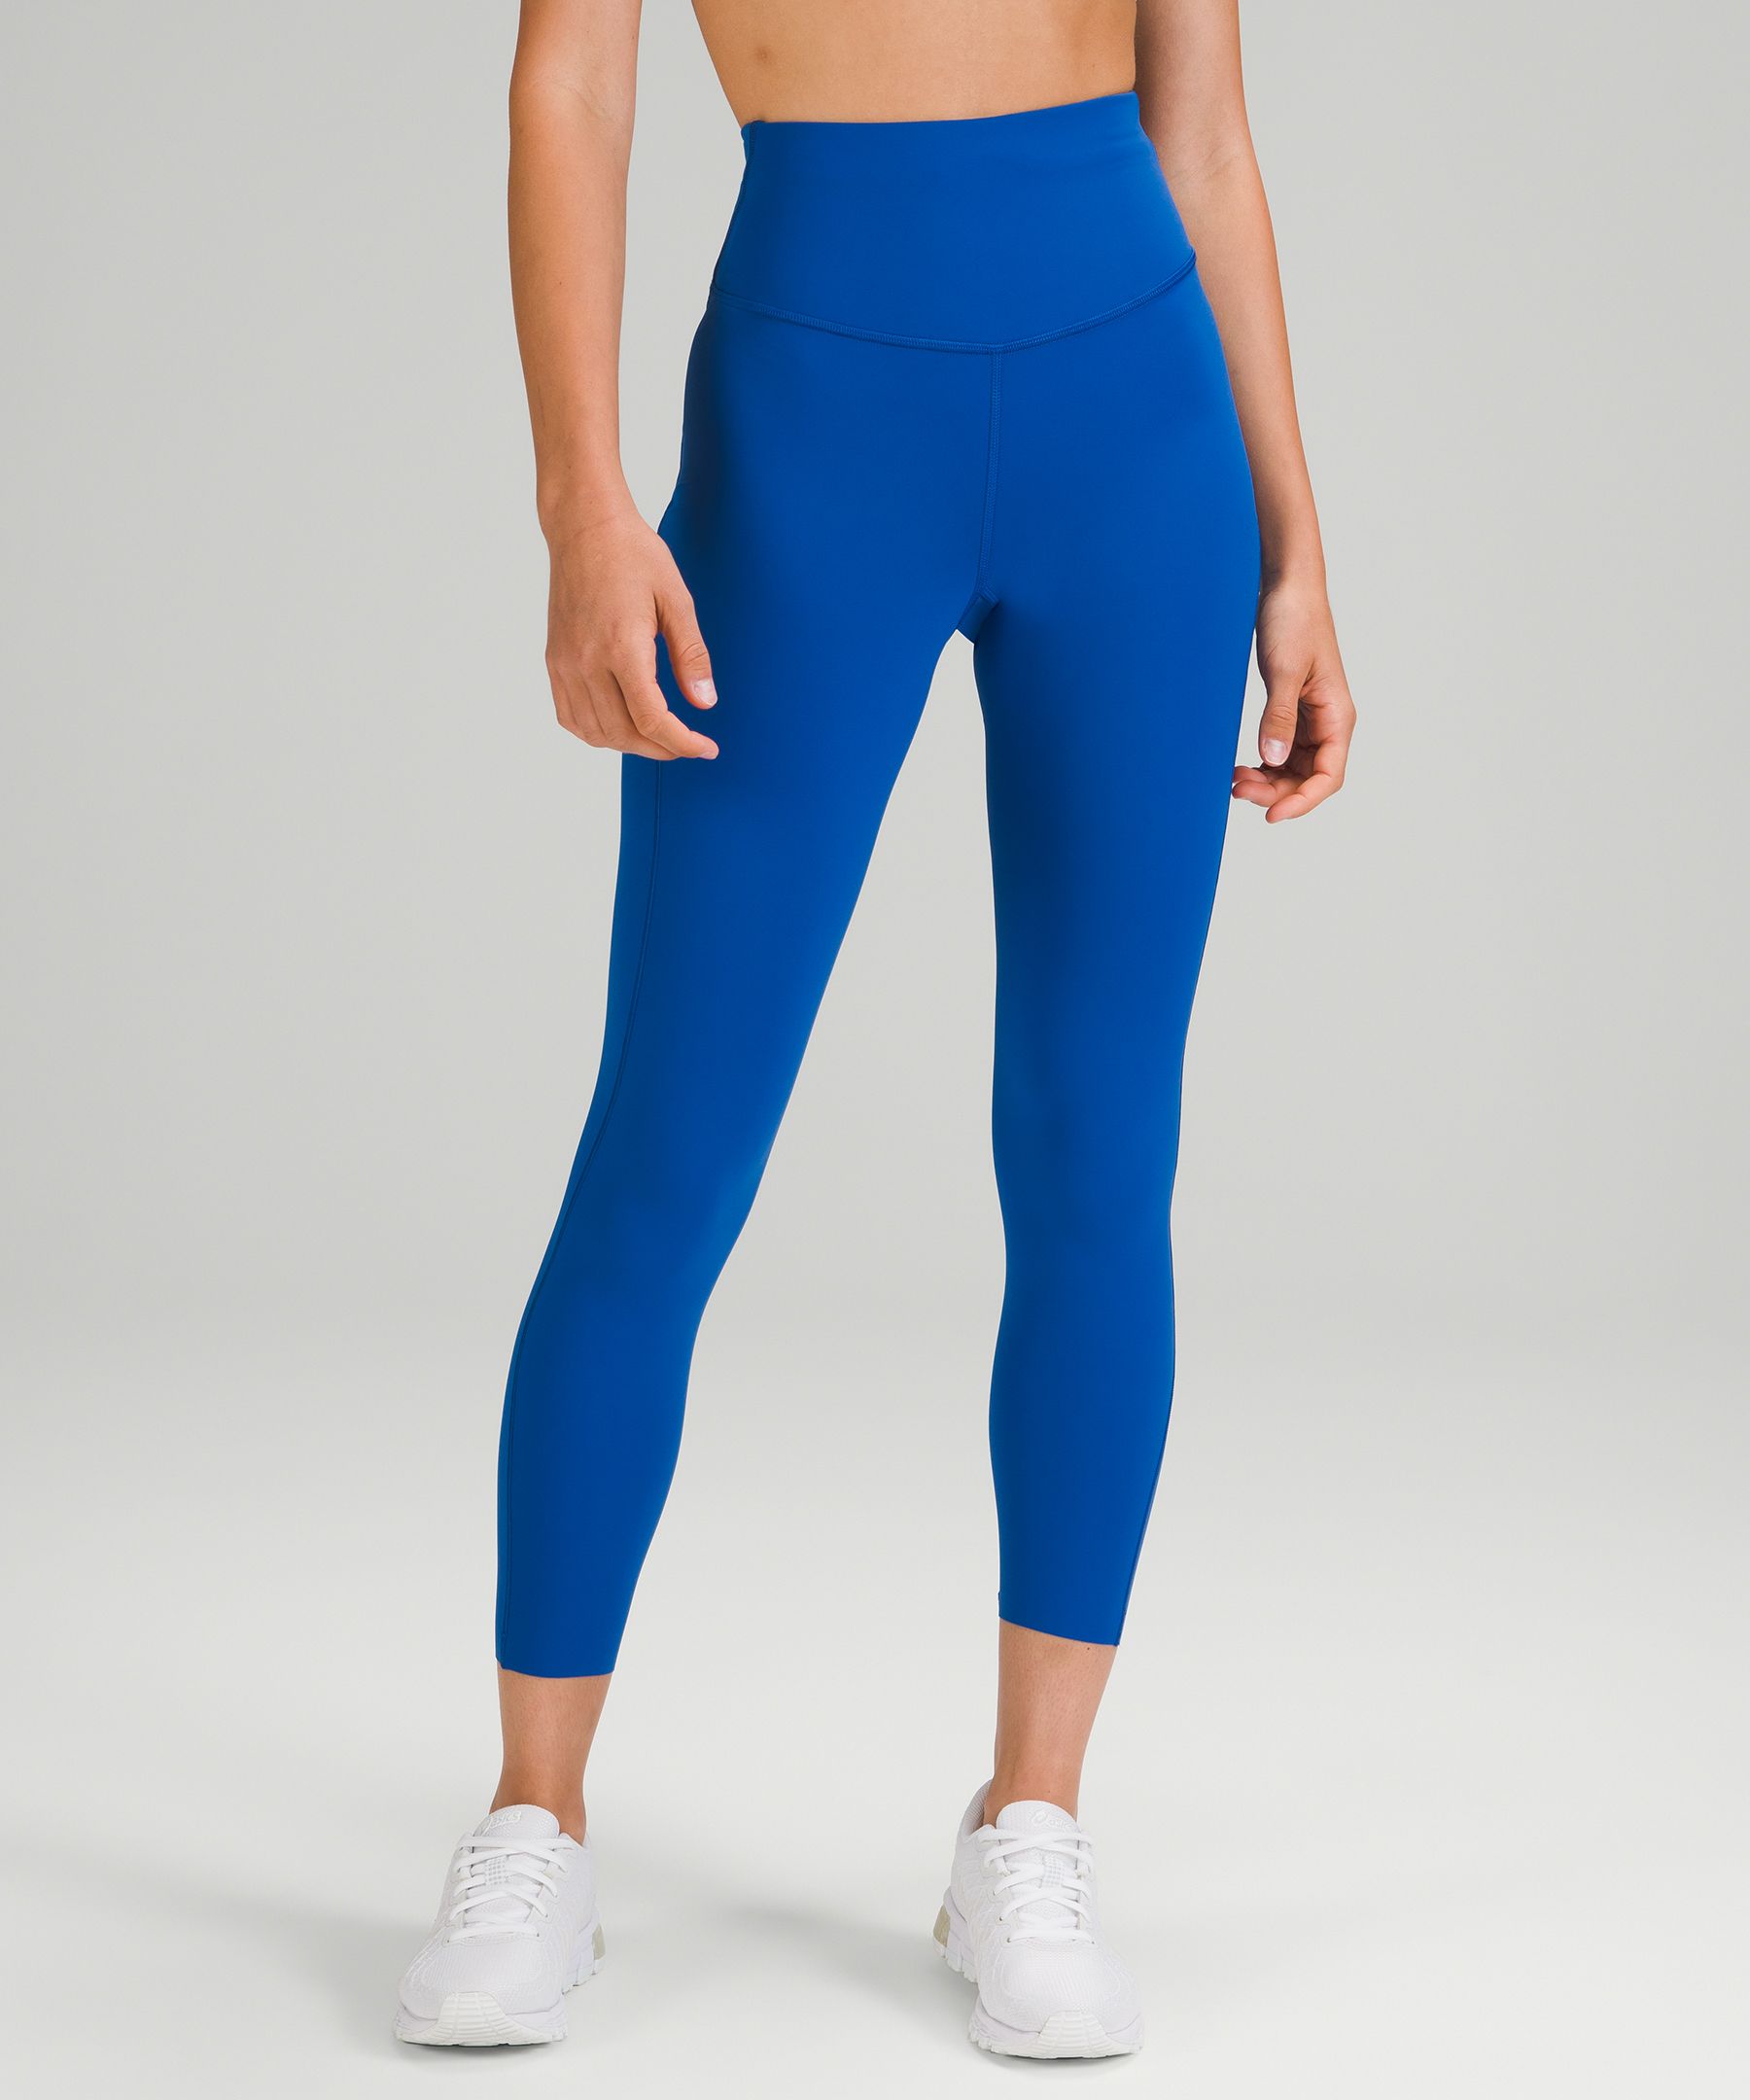 Fit Review: Base Pace High-Rise Tight 25 - Living My Bex Life